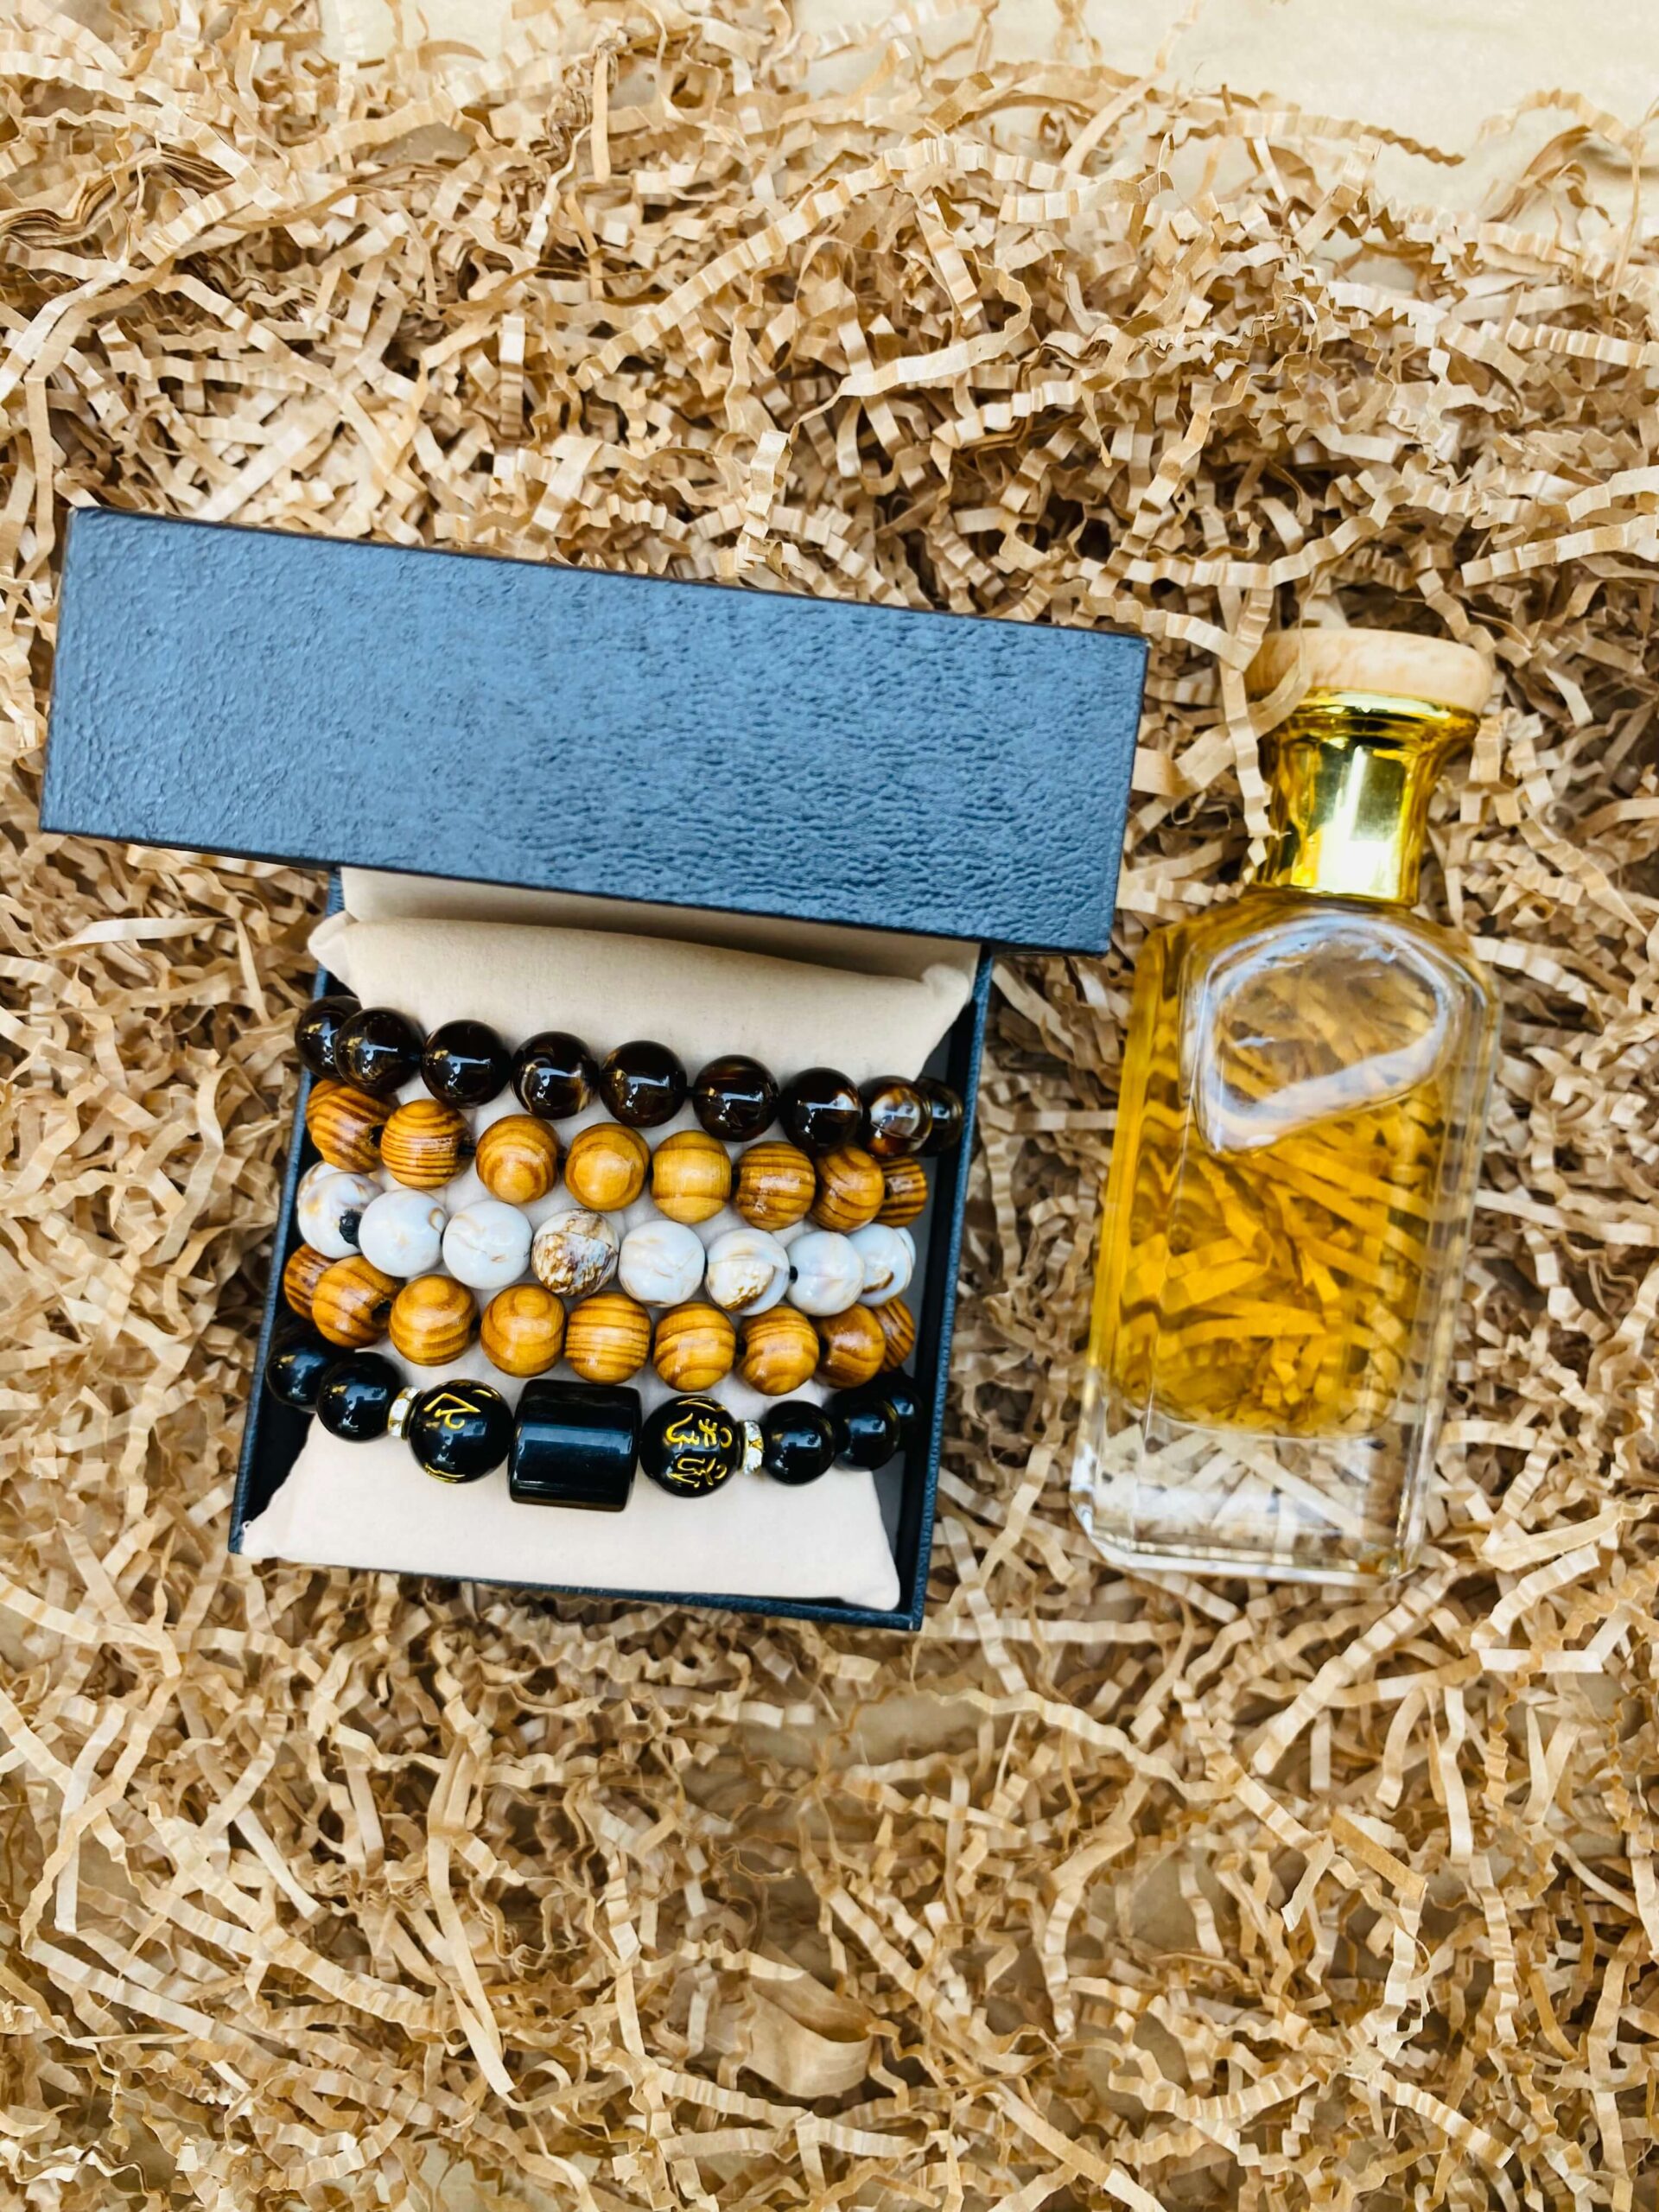 Aniekan Luxury Gift Boxes for him in Lagos bracelet and perfume oil